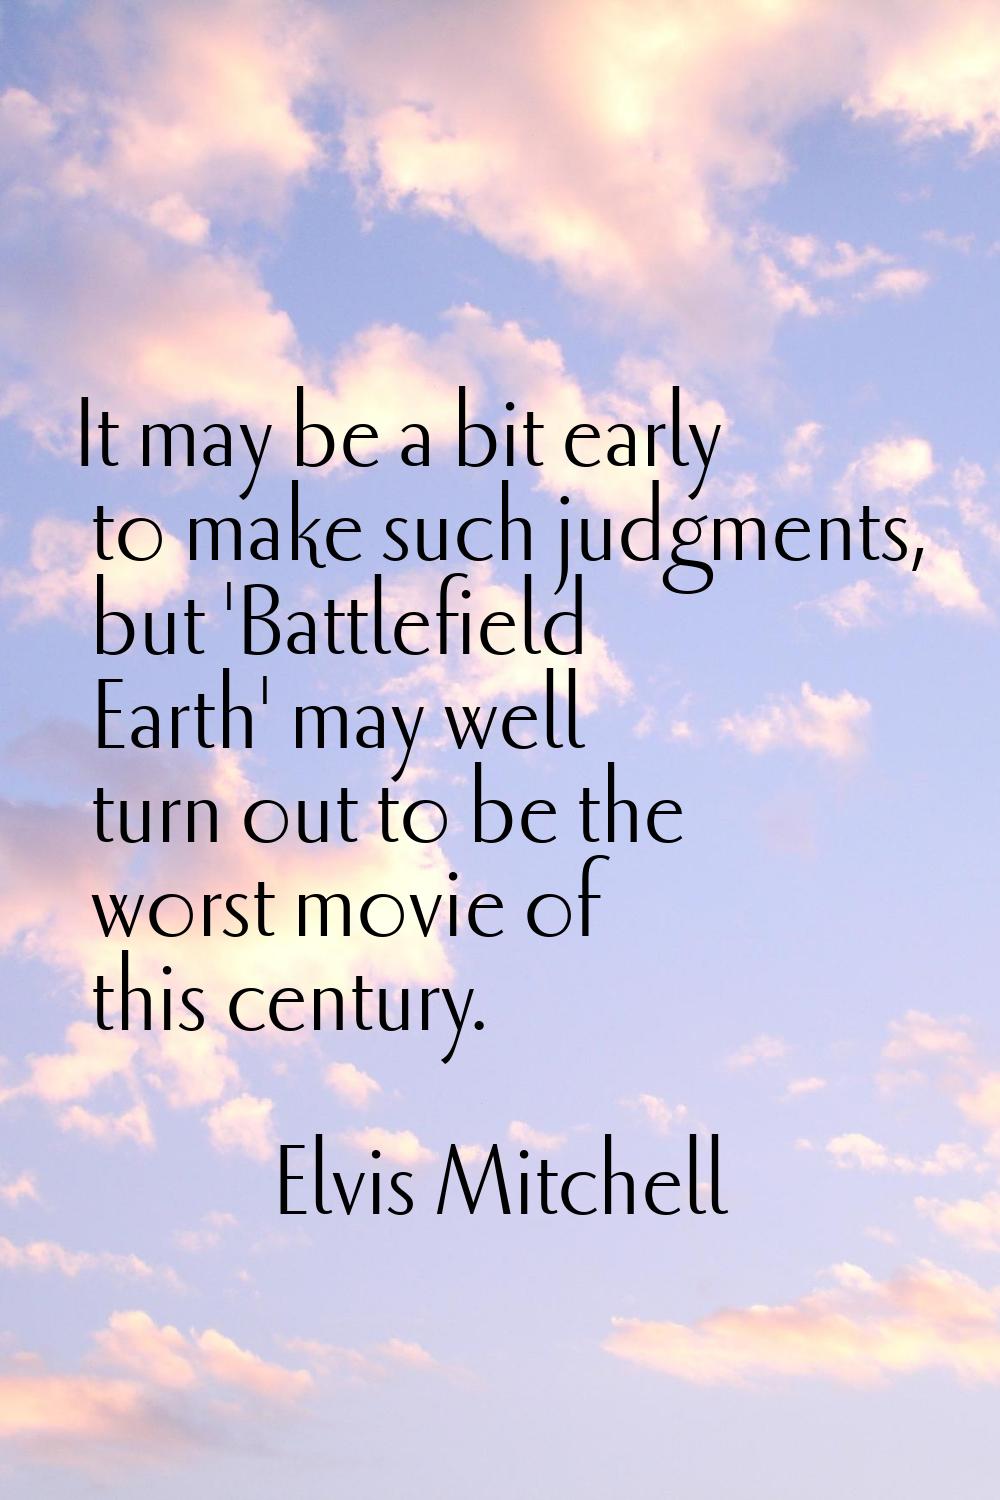 It may be a bit early to make such judgments, but 'Battlefield Earth' may well turn out to be the w